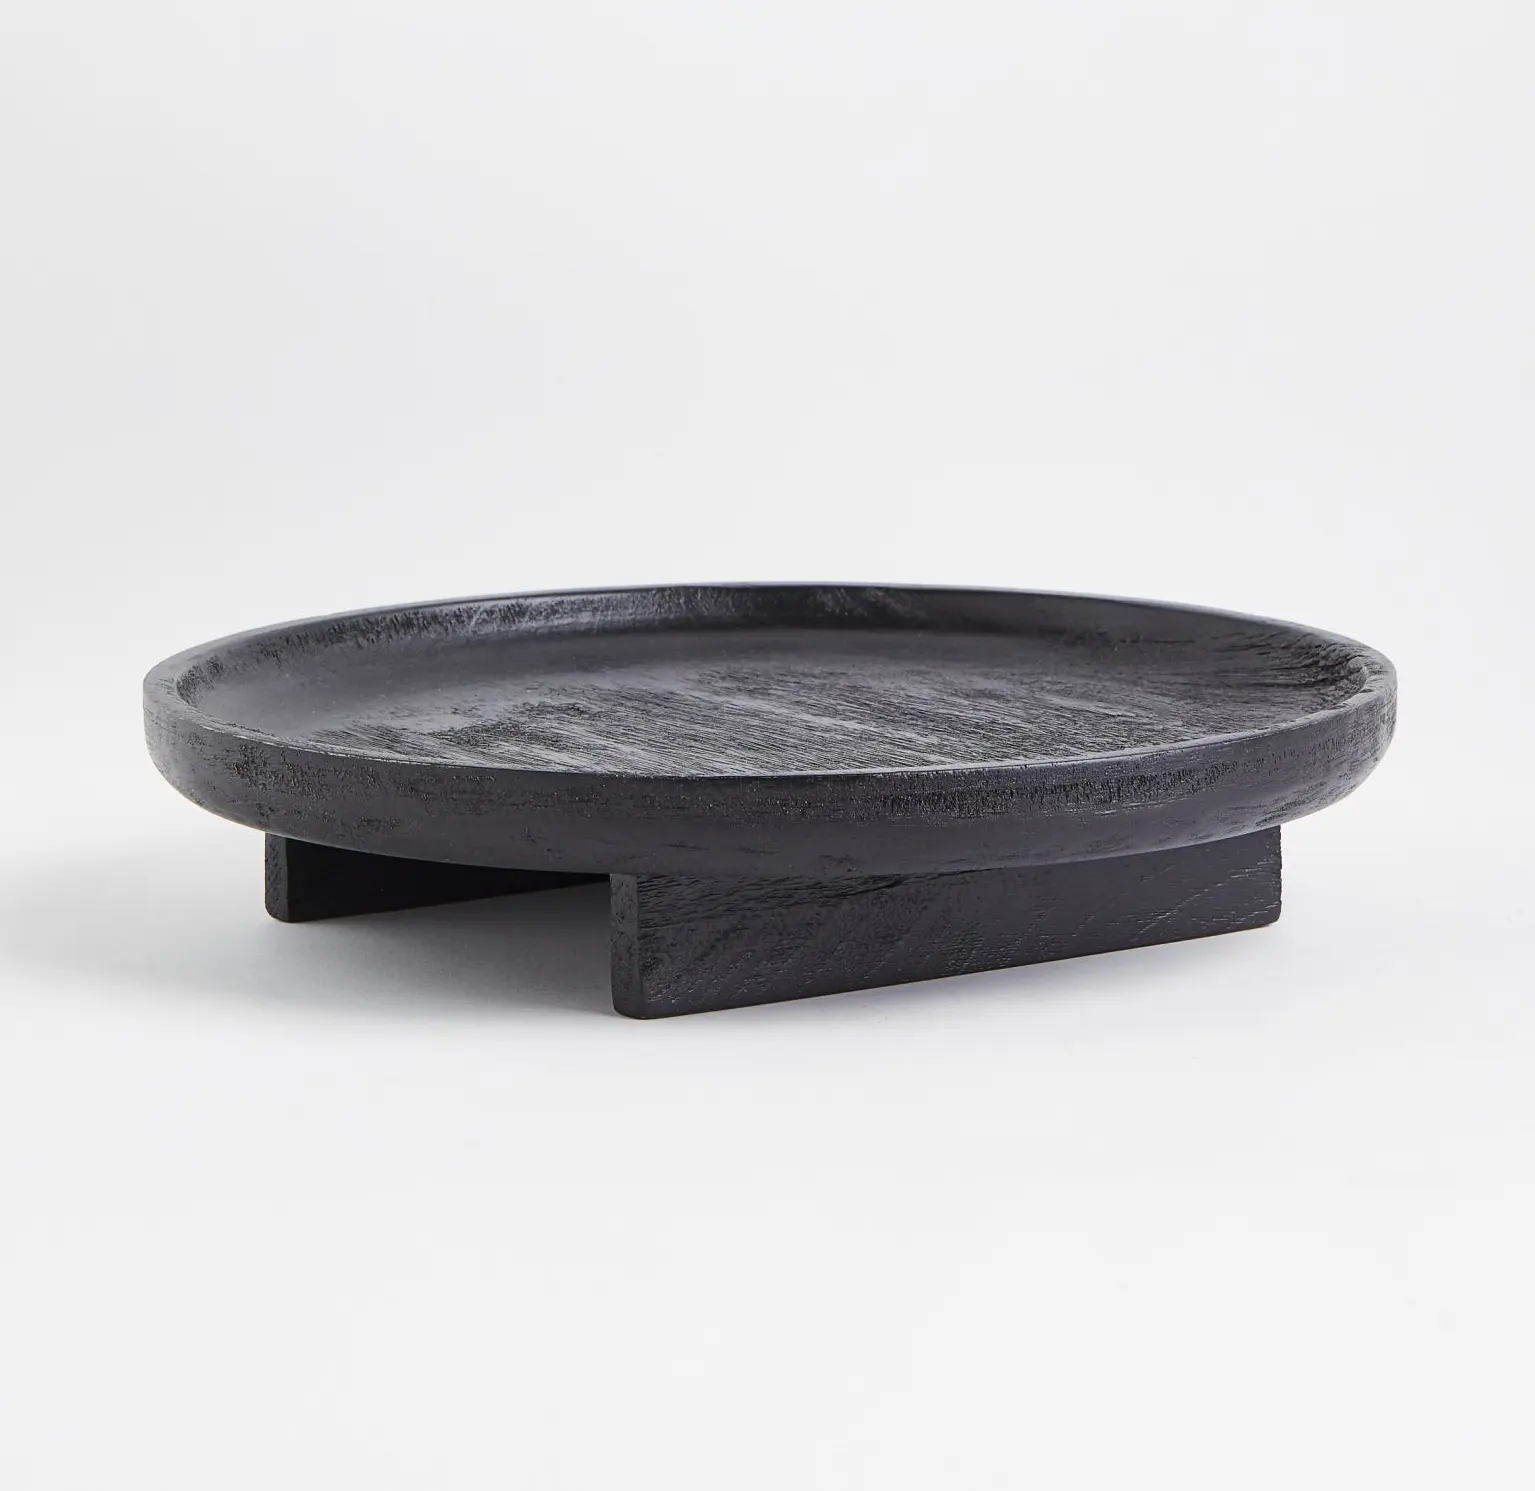 Round wooden tray in black Hot selling mango wood products High quality wood trays new trending products in black color